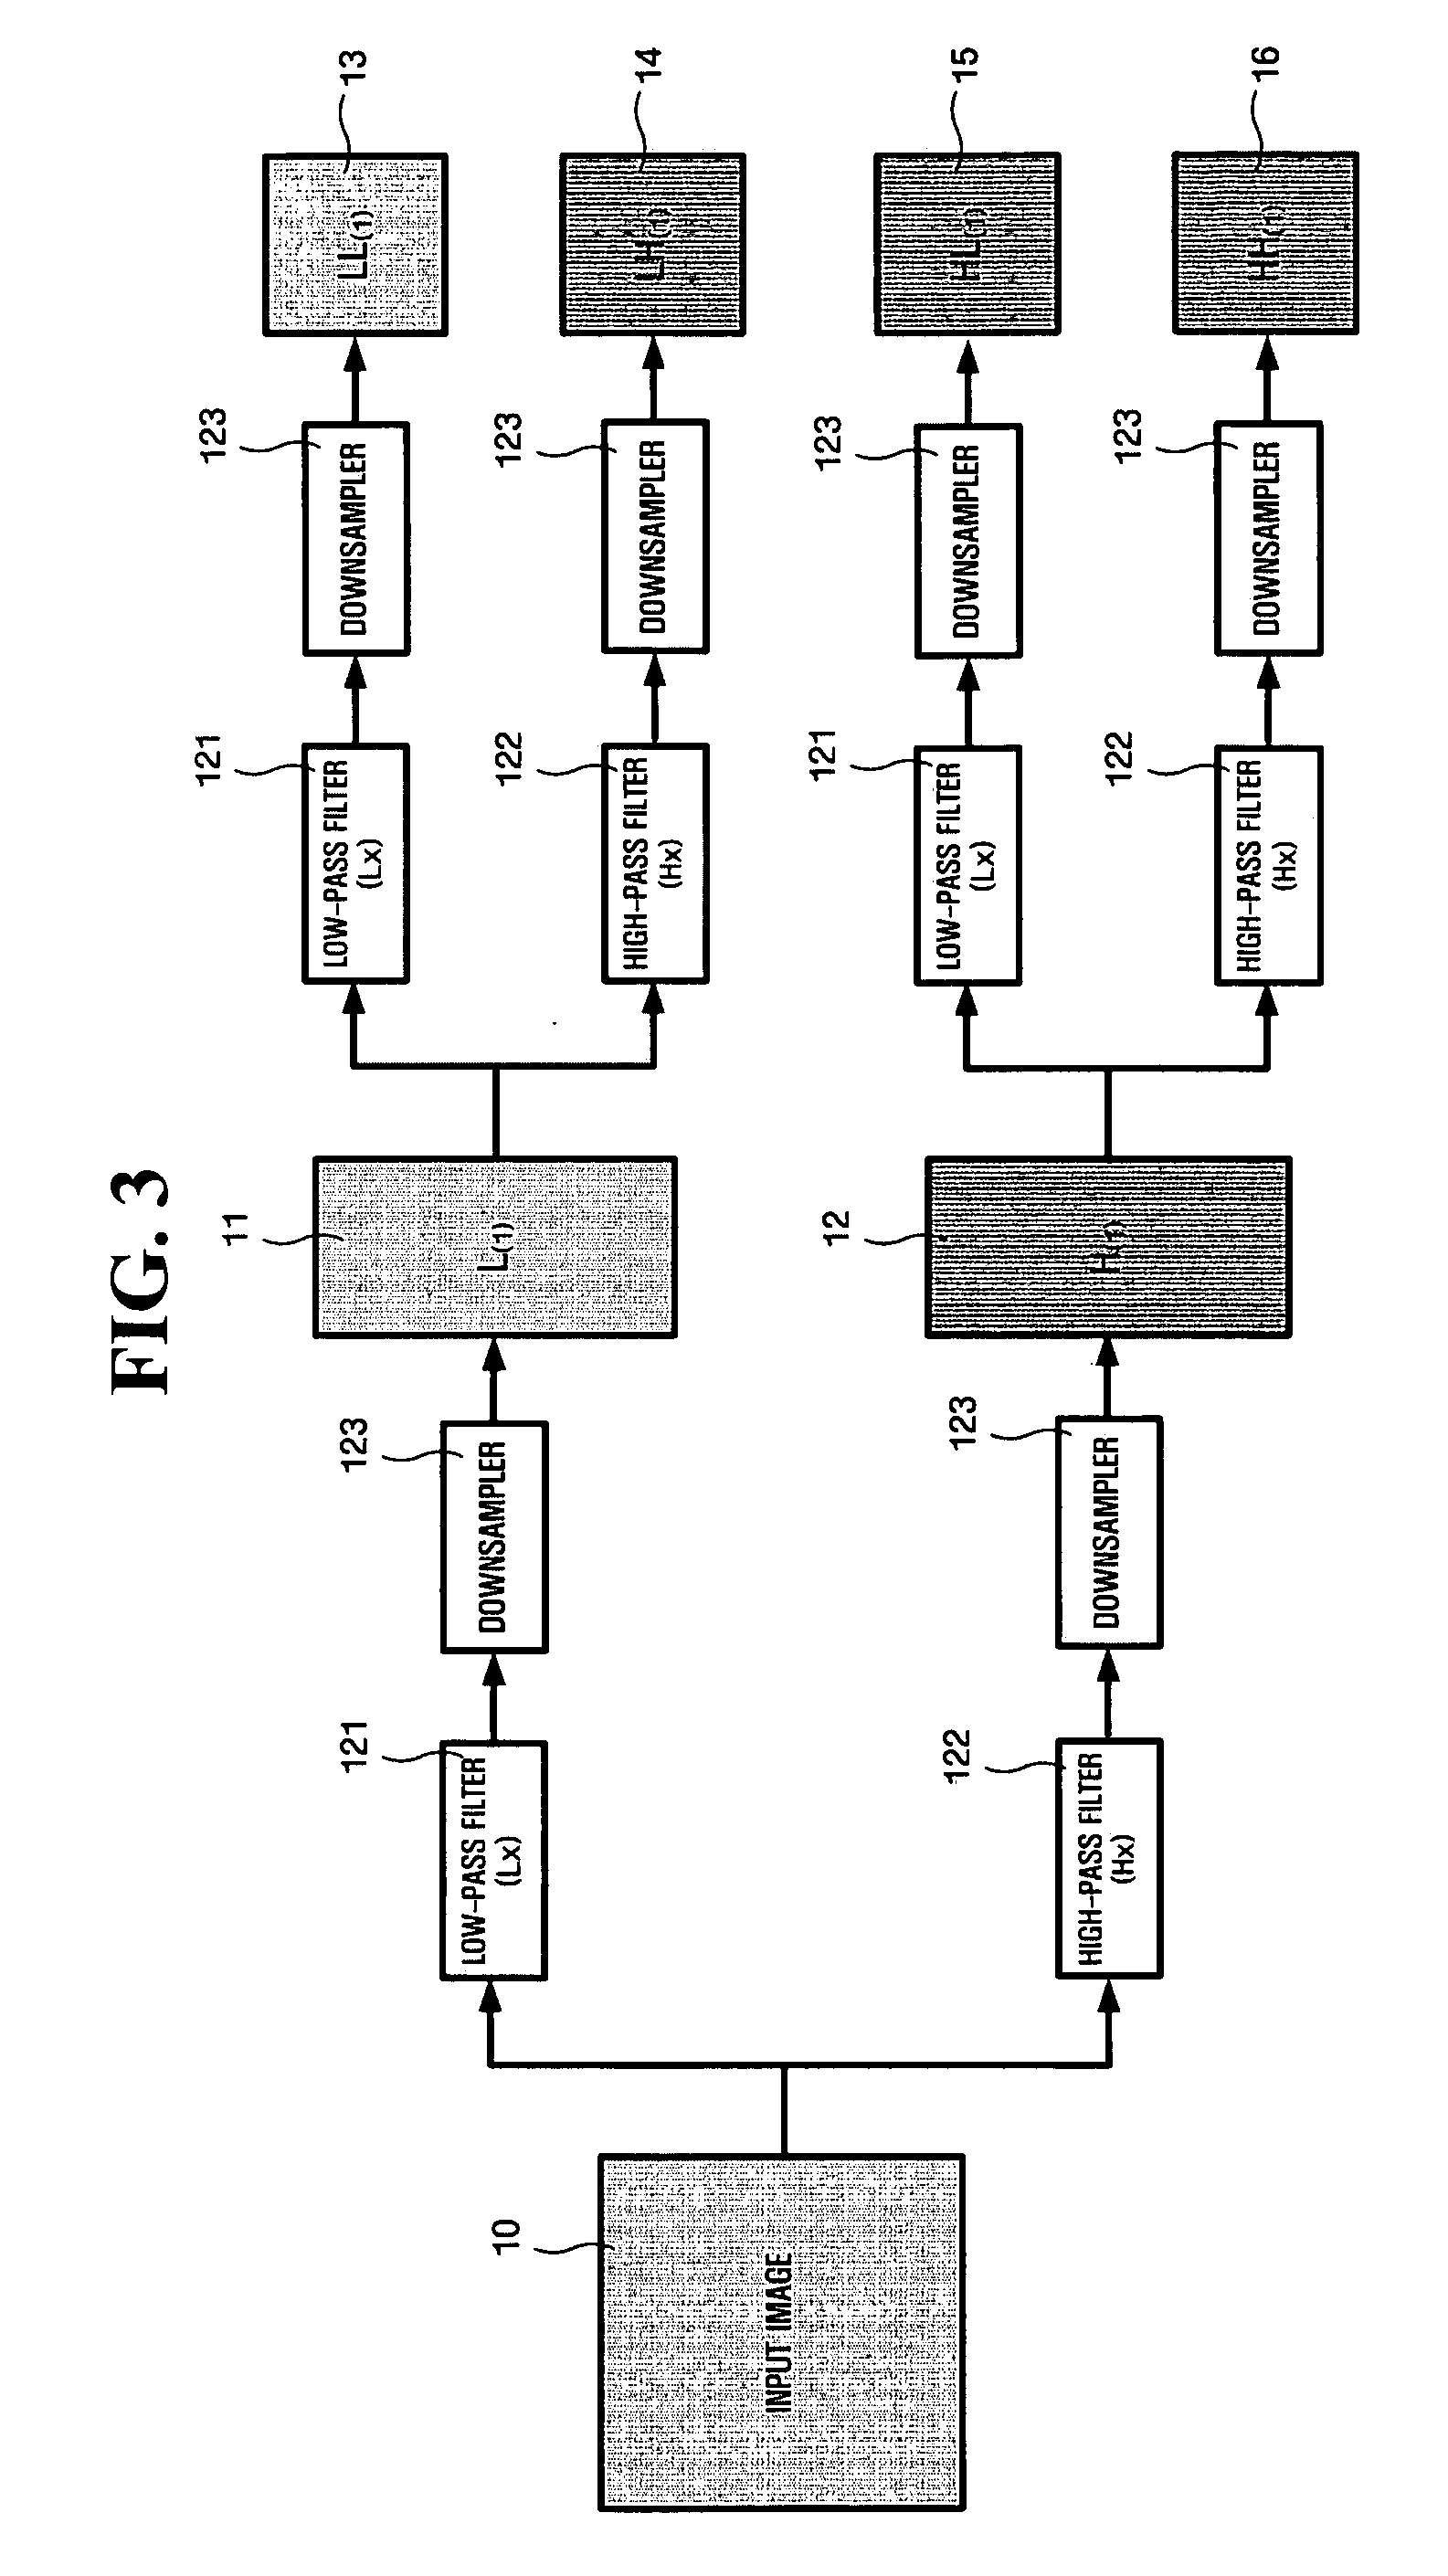 Video coding method and apparatus